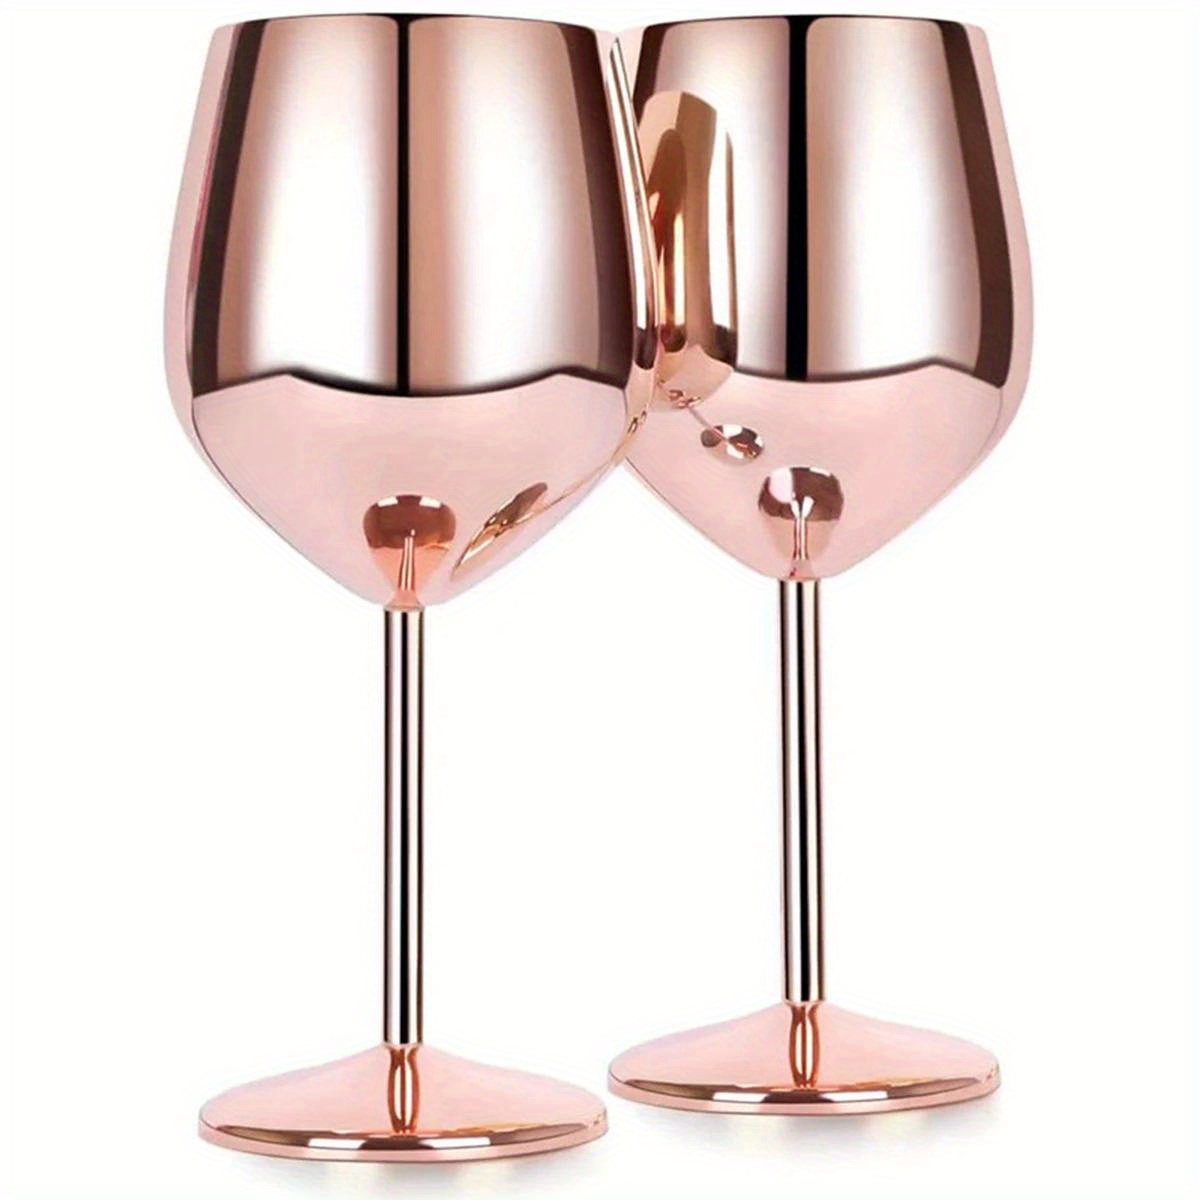 

2pcs Stainless Steel Wine Glasses 18oz Large Capacity Unbreakable Wine Glasses Family Dinner Party Wedding Anniversary